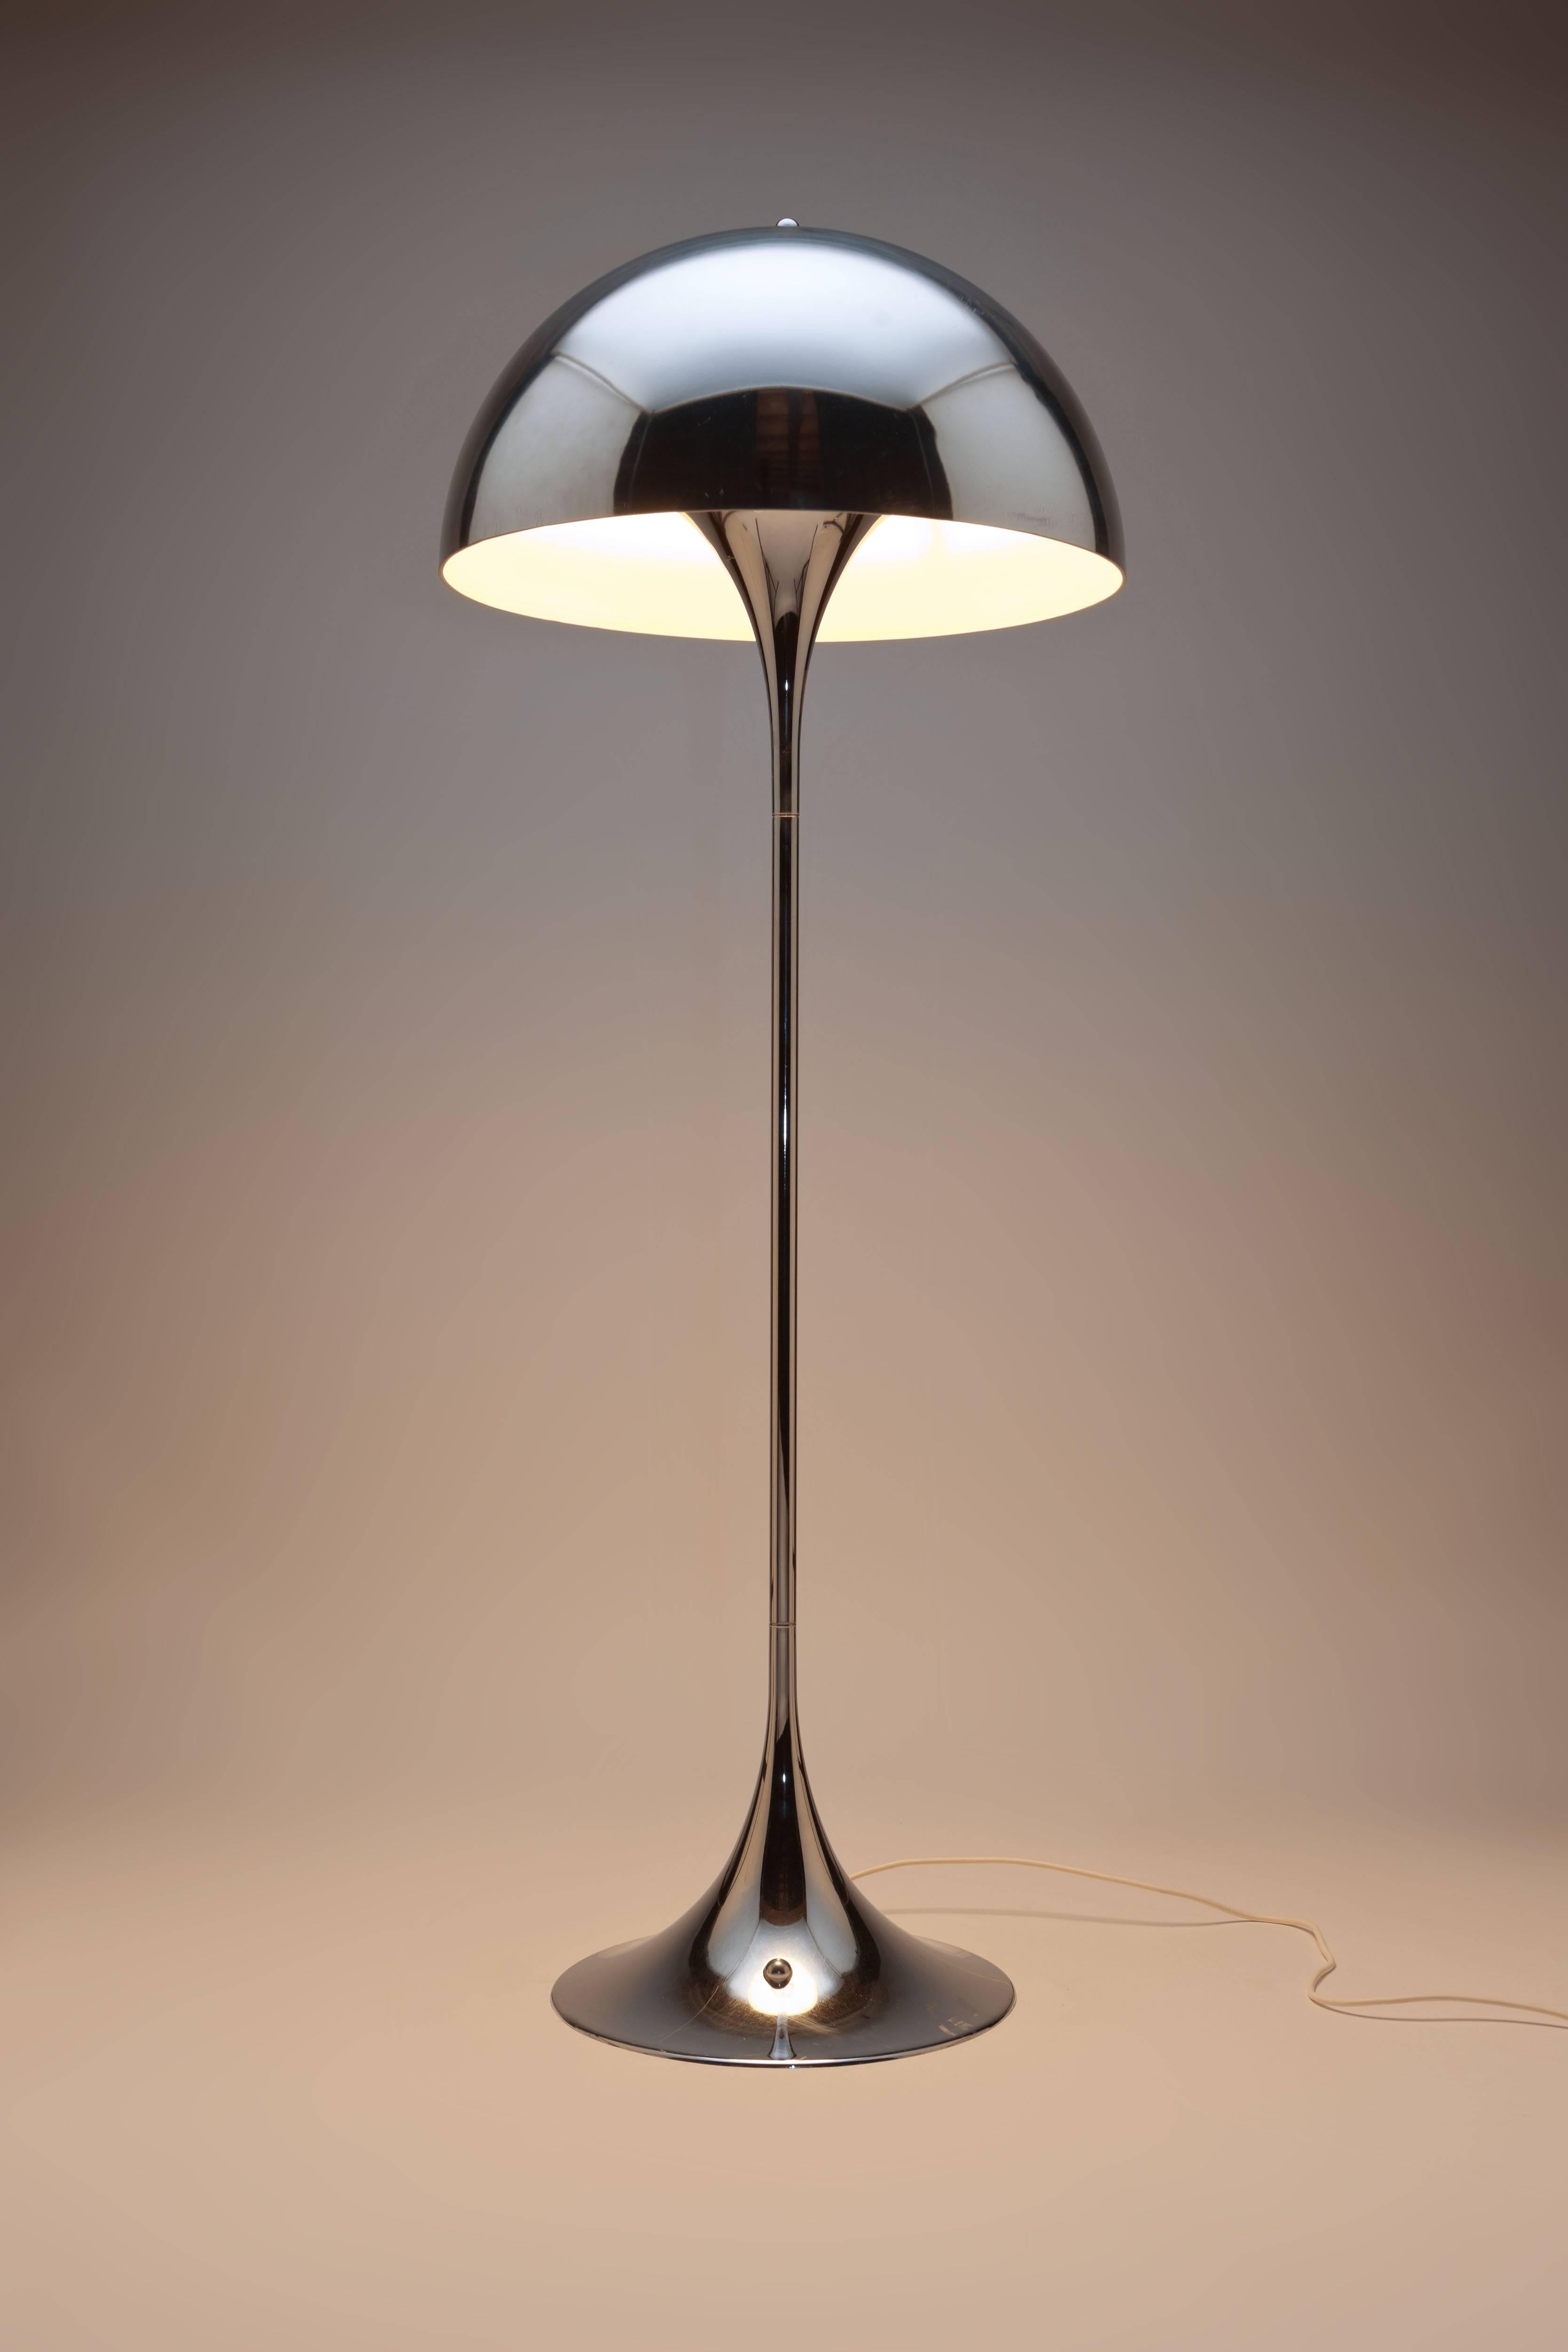 Very rare all chrome version of the iconic Panthella floor lamp, designed in 1971 by Danish designer Verner Panton and produced by Louis Poulsen.
Panthella is characterized by its harmonious, calm form. The semi-circular shade creates a soft,